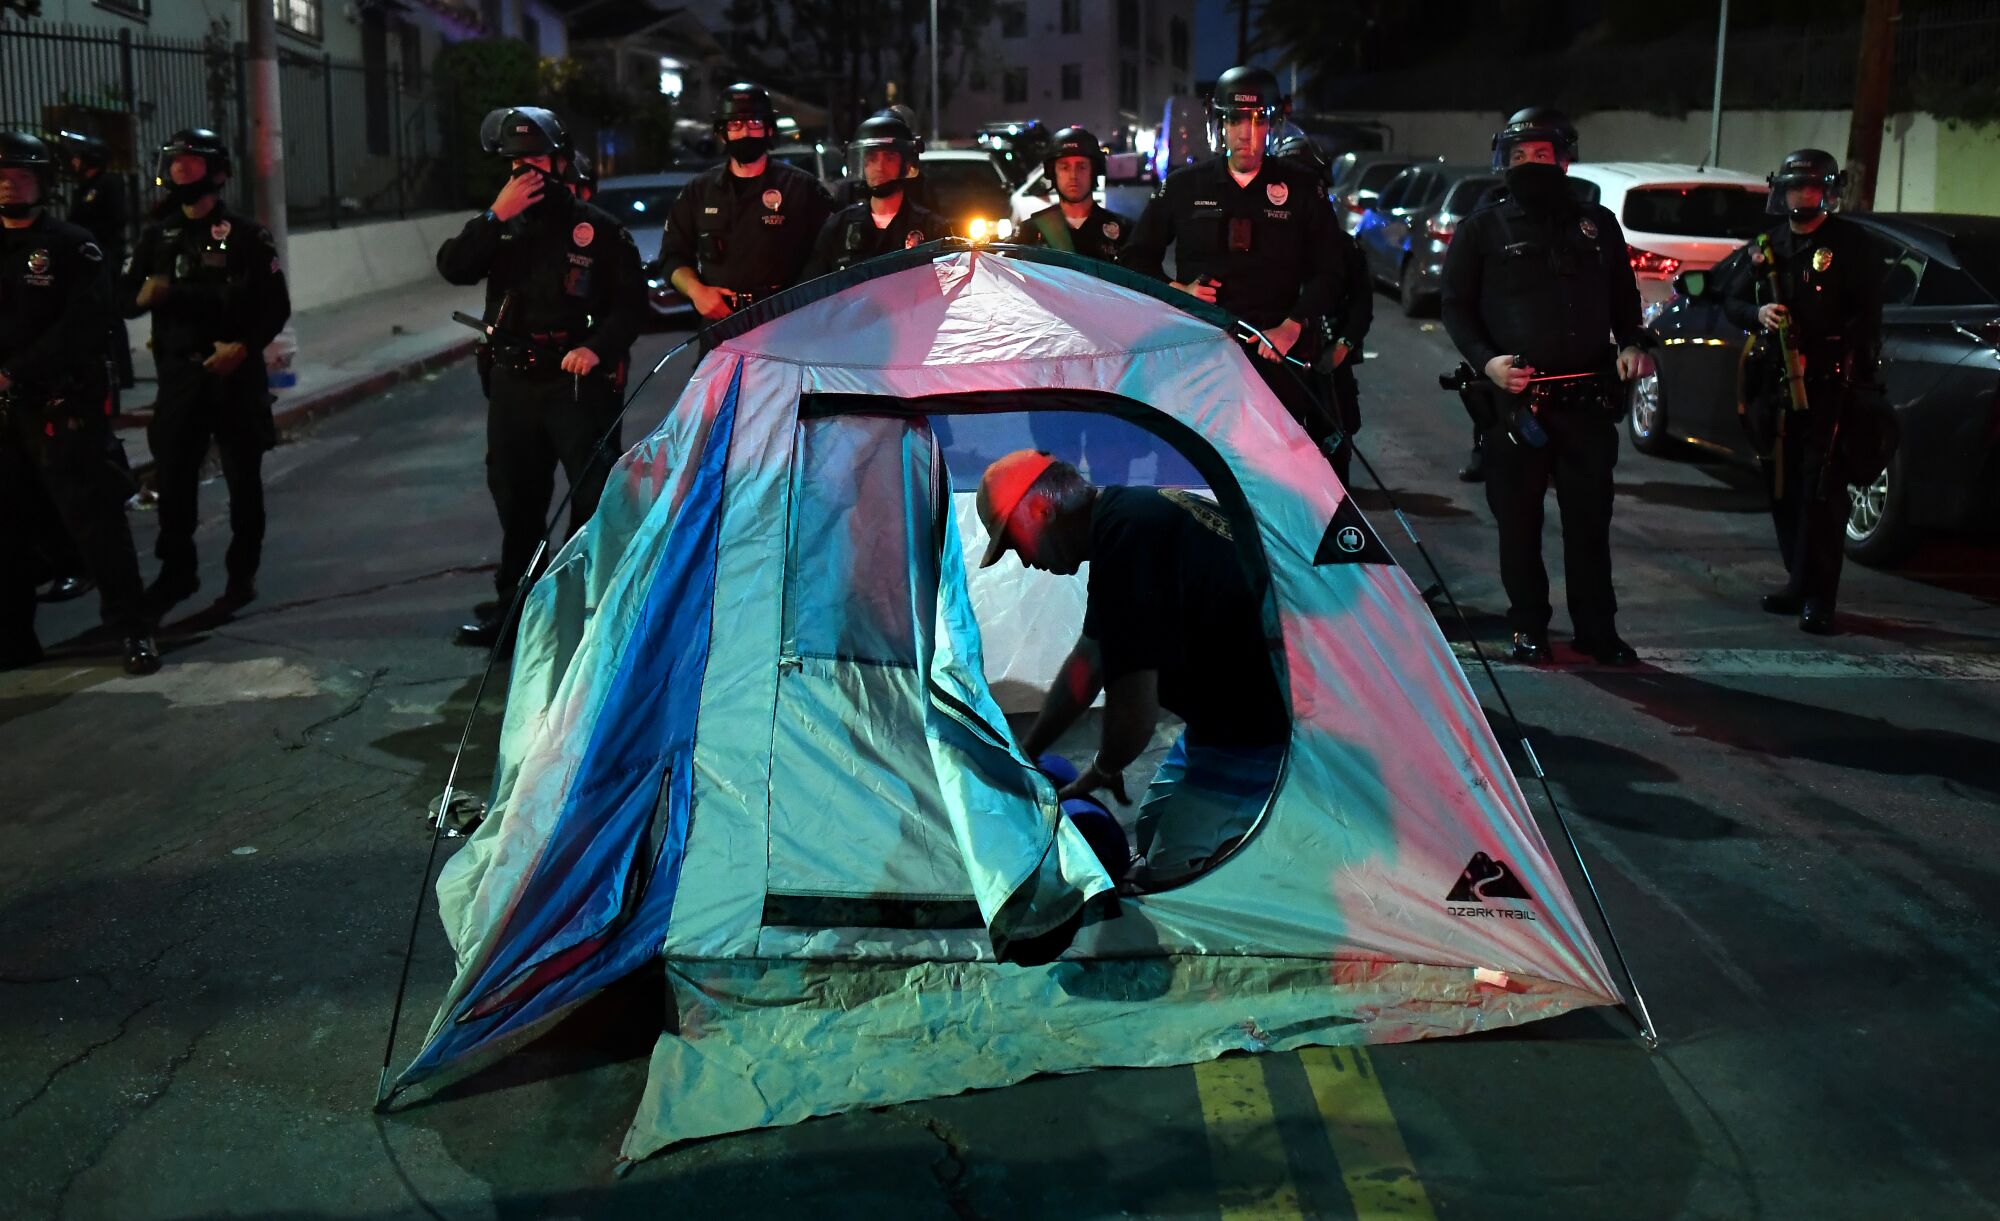 A protestor sets up a tent at Santa Ynez St. and Glendale Ave. as LAPD officers stand guard in Echo Park in March 2021